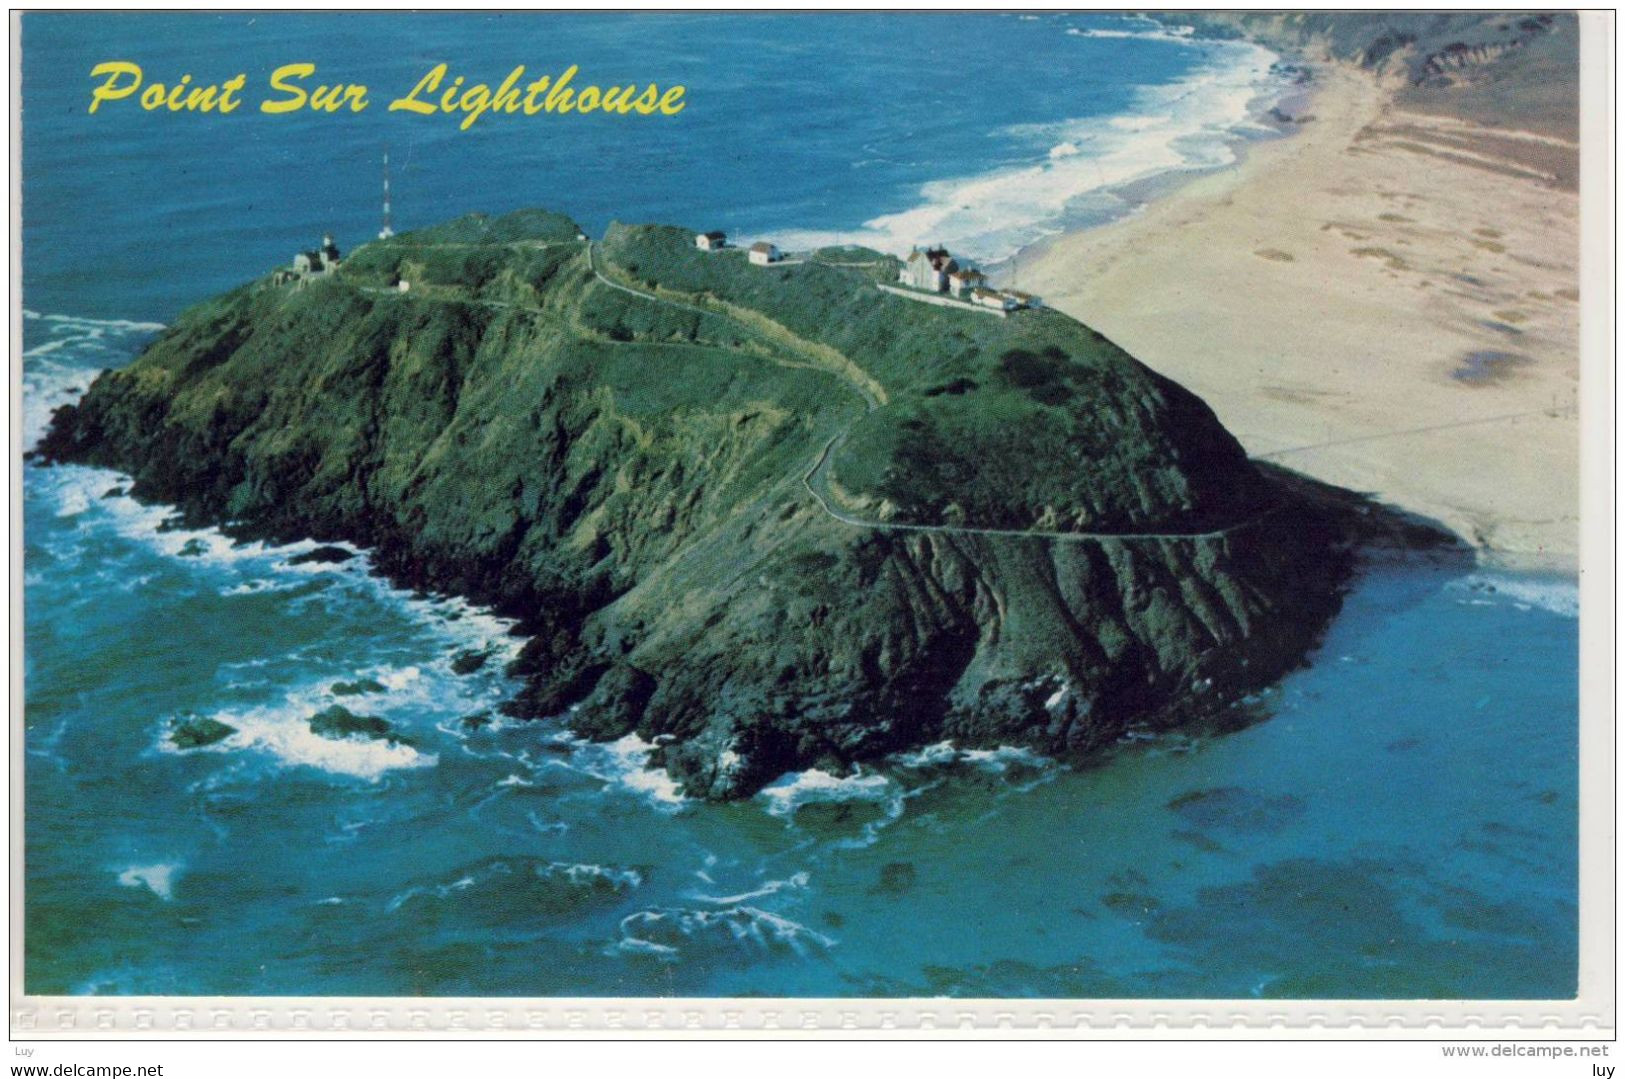 POINT SUR - Lighthoouse, Air View, Along State Highway 1 - American Roadside